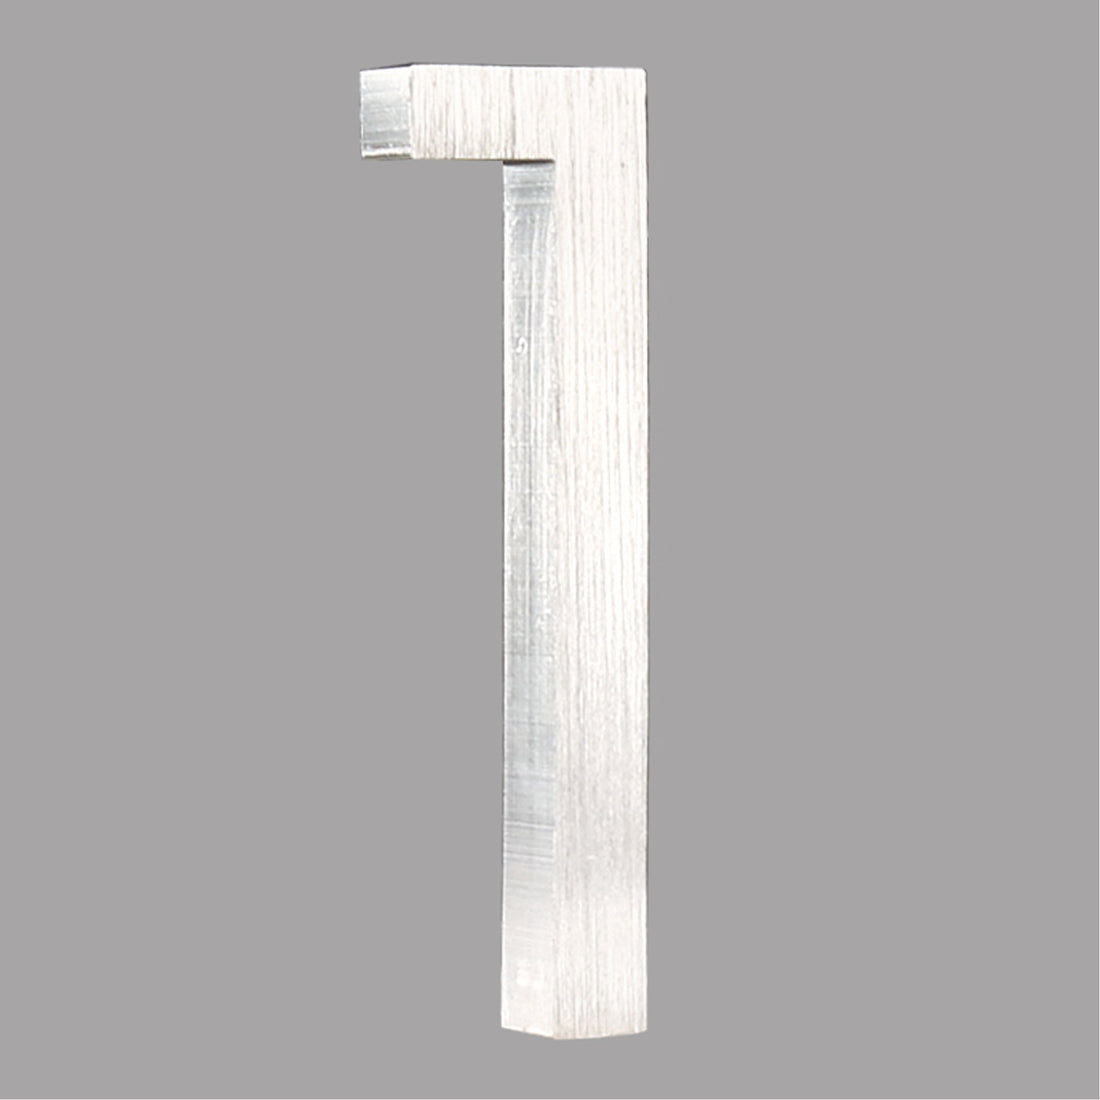 6 inch (15cm) House Number, Silver Aluminium Alloy